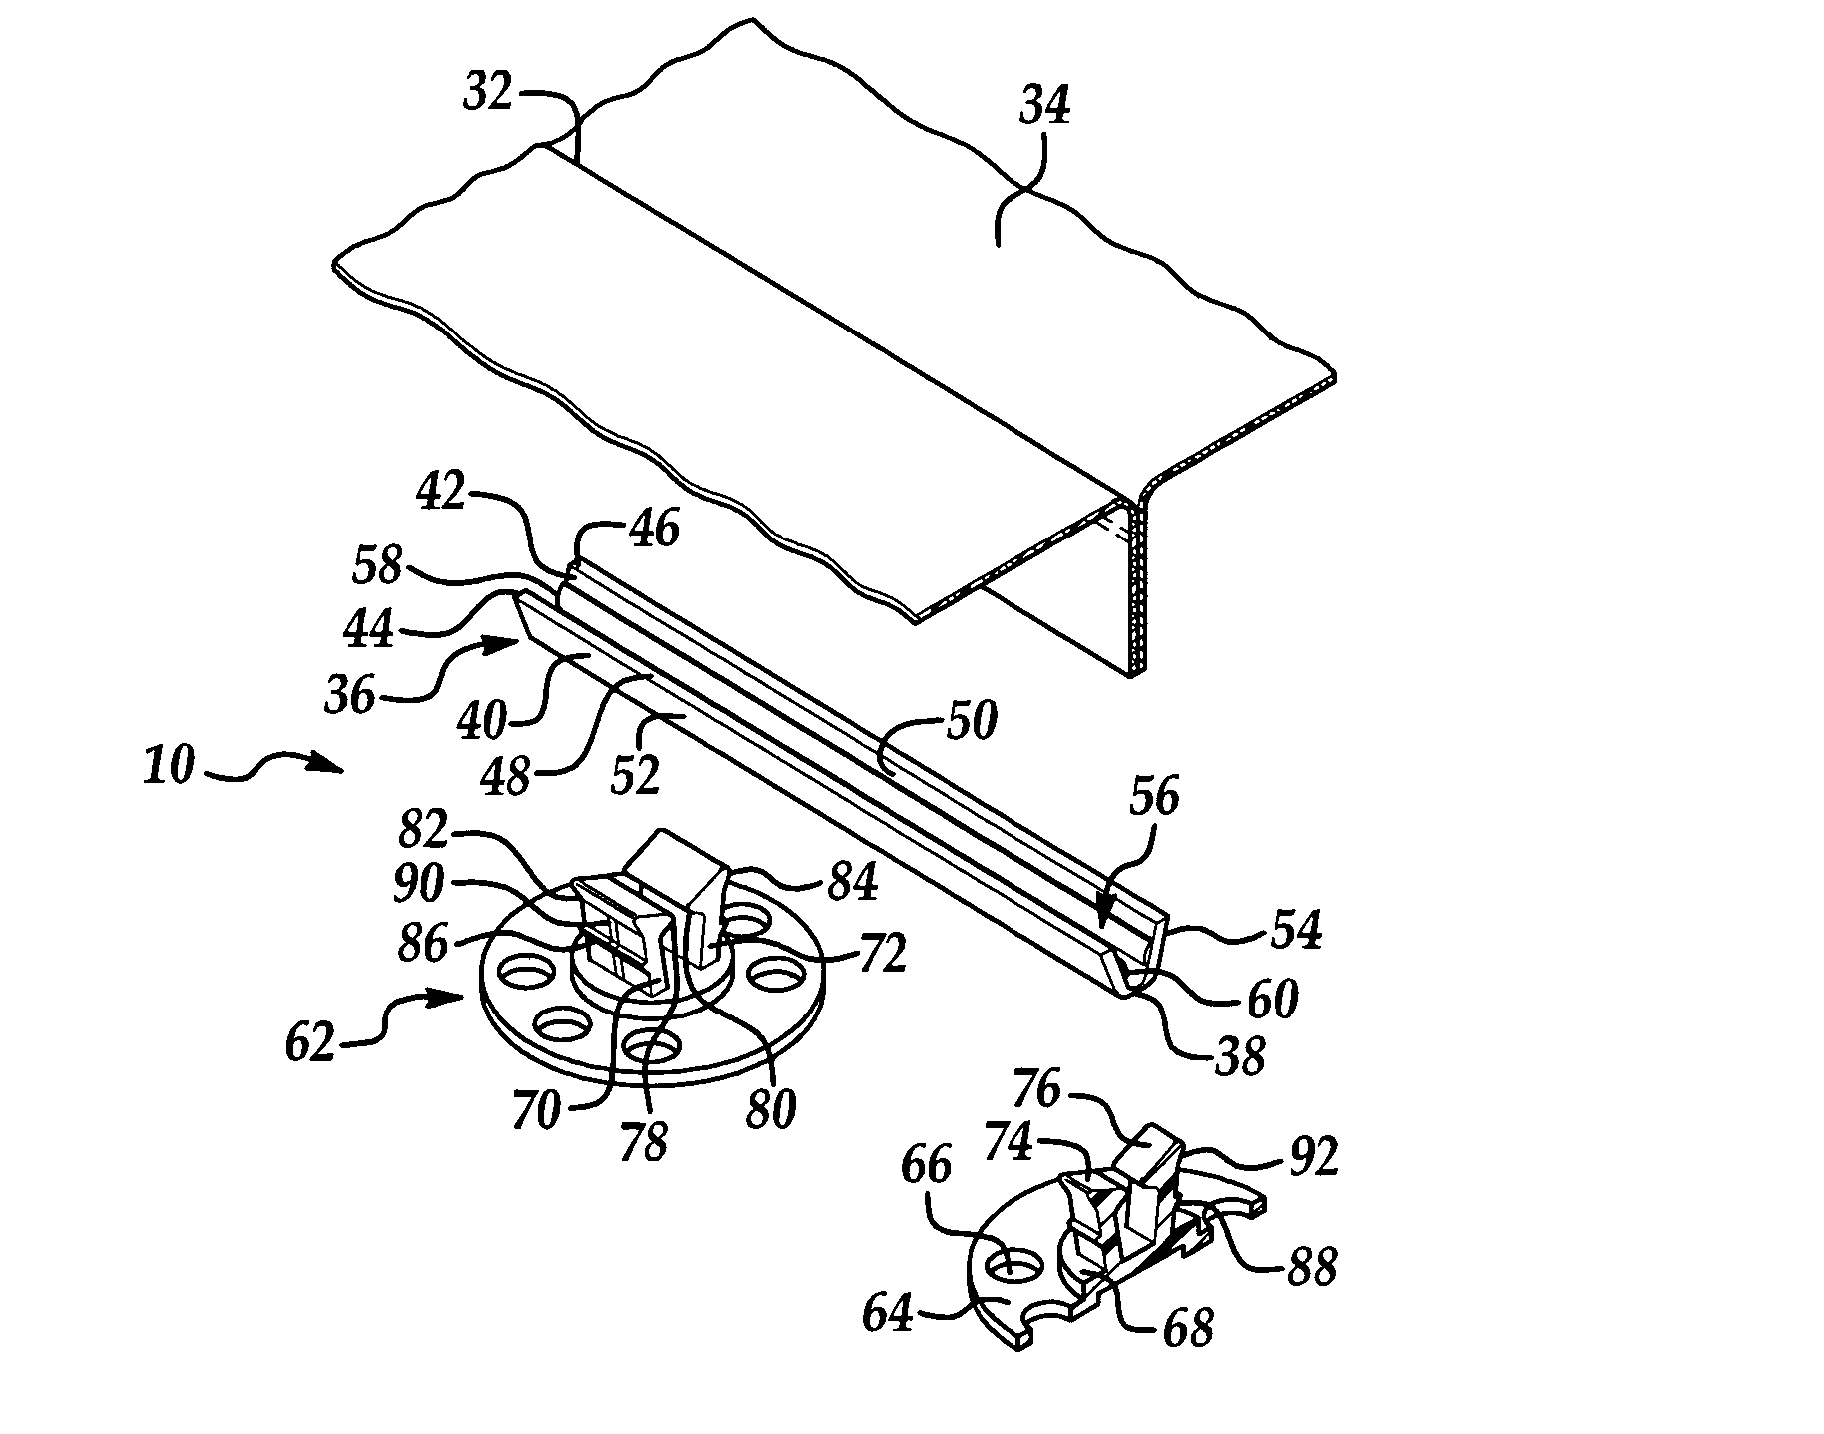 Attachment assembly for securing trim material to the padding of a vehicle seat